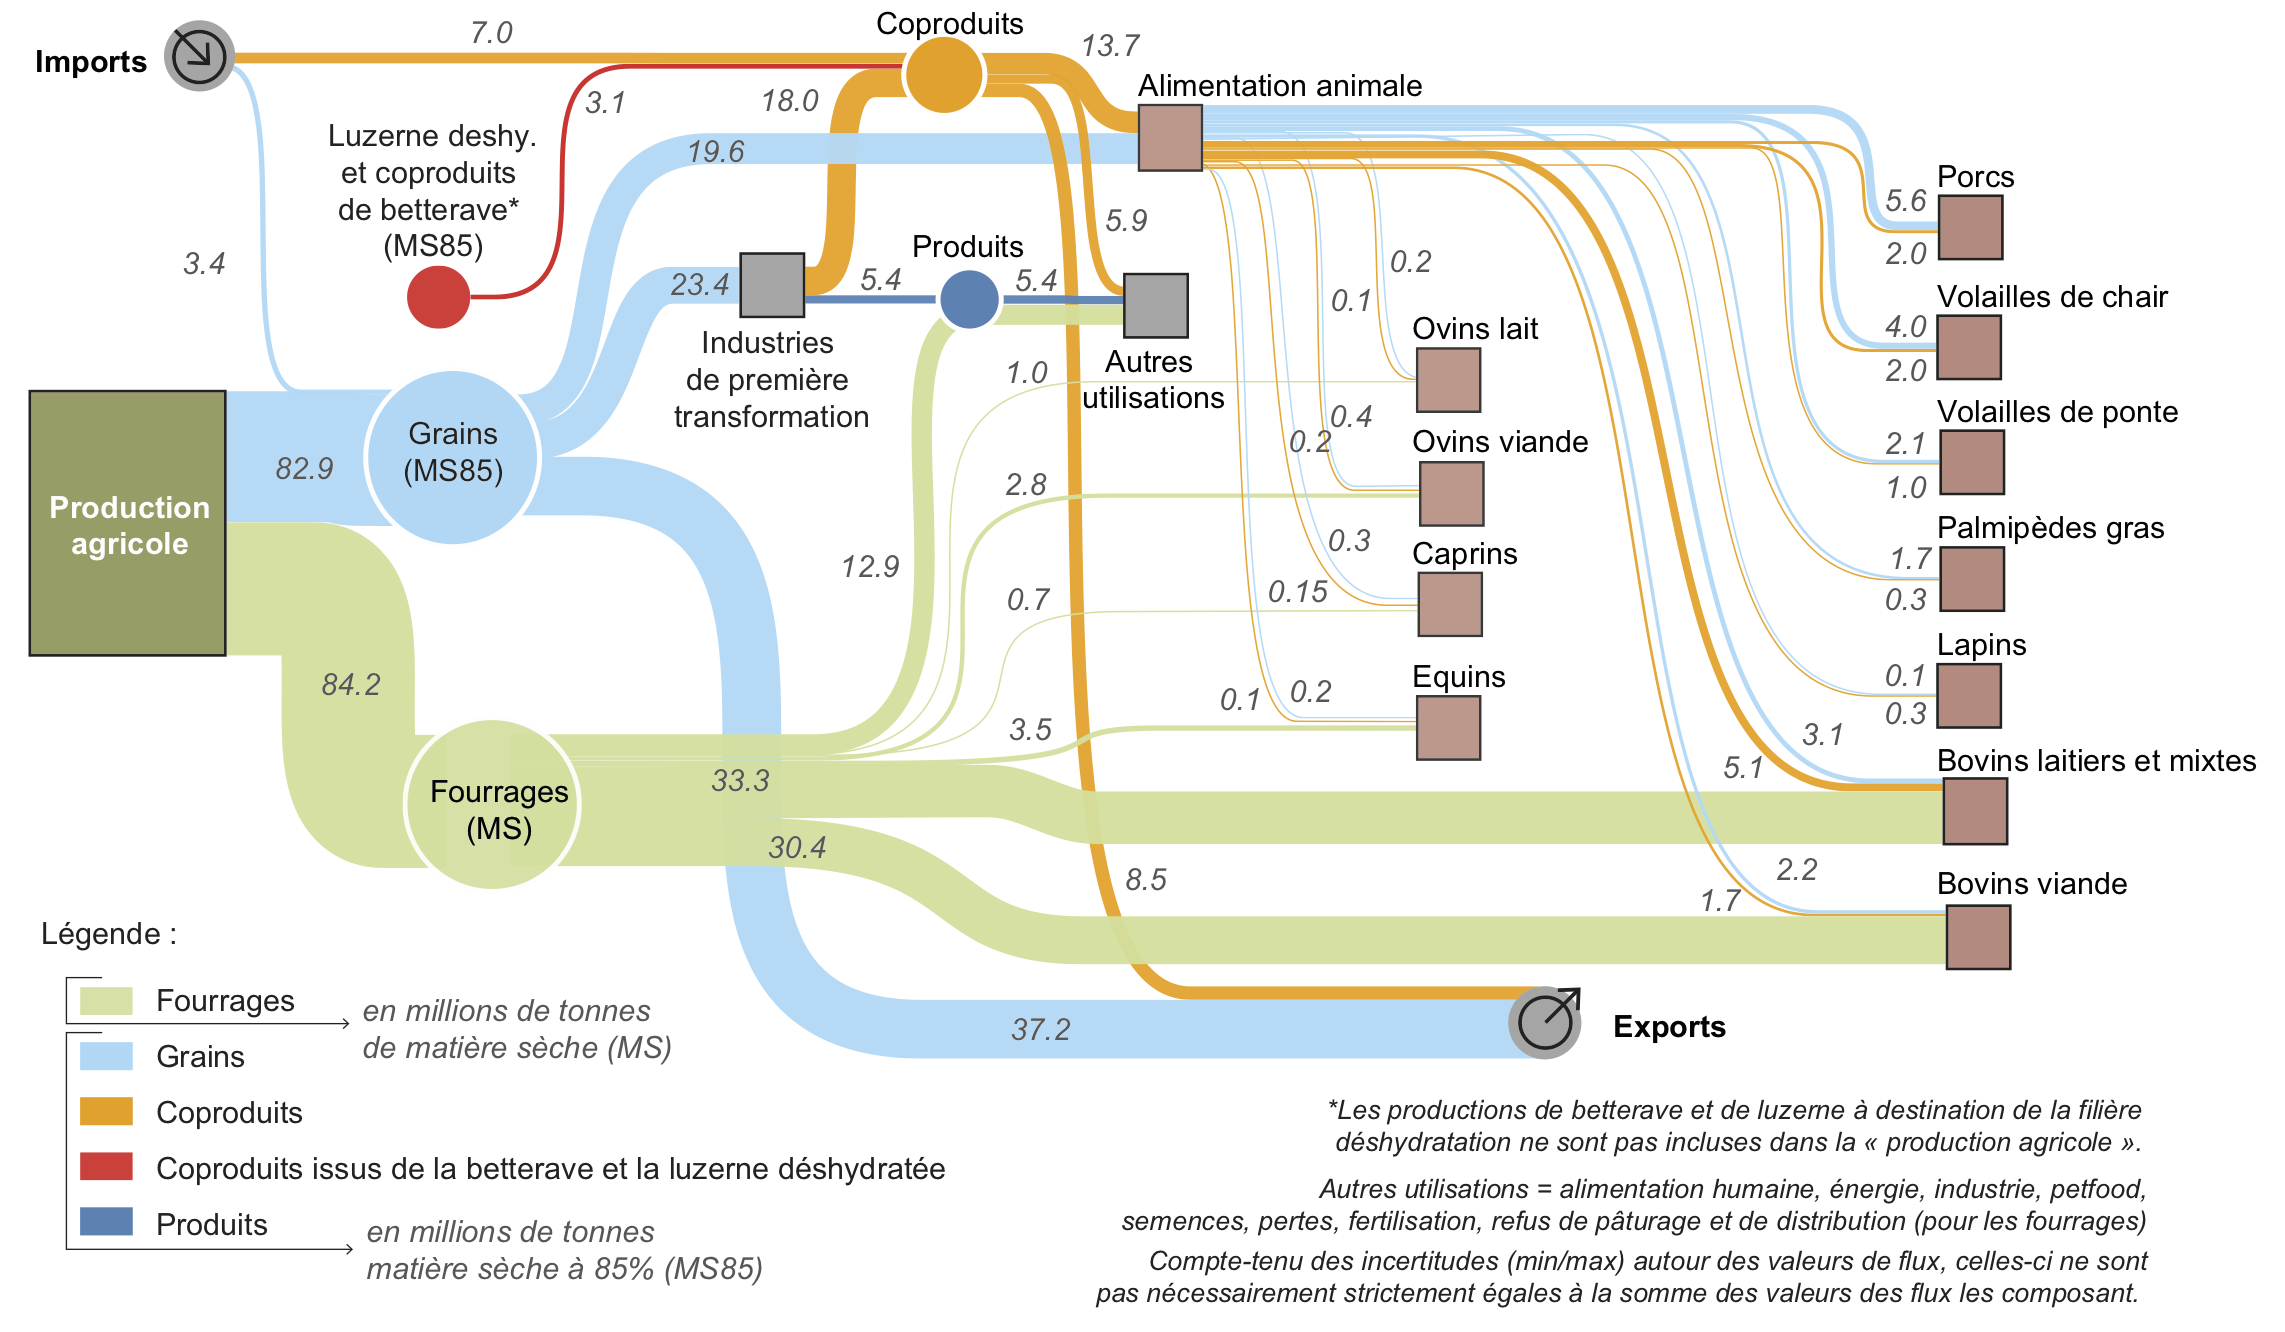 Sankey diagram of a supply chain (animal food production and supply).